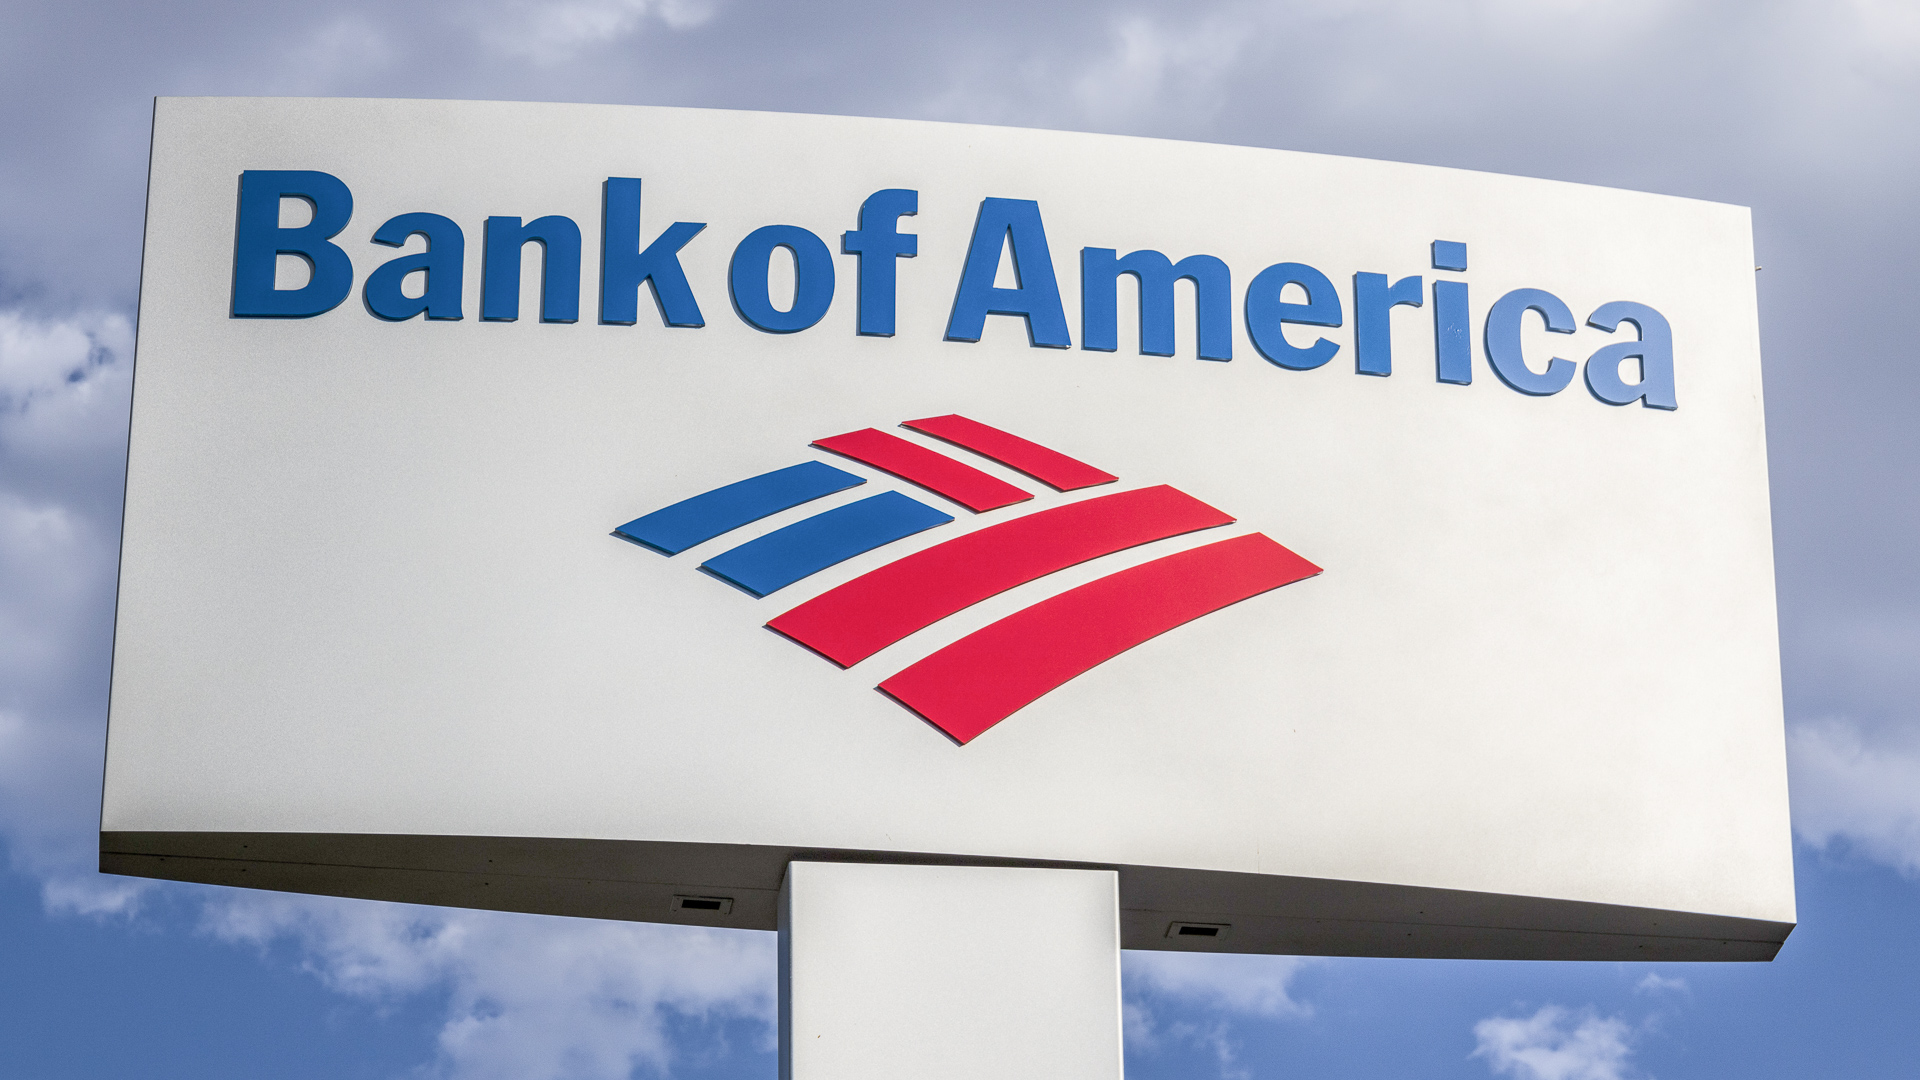 How To Set Up Bank of America Direct Deposit (3 Easy Steps